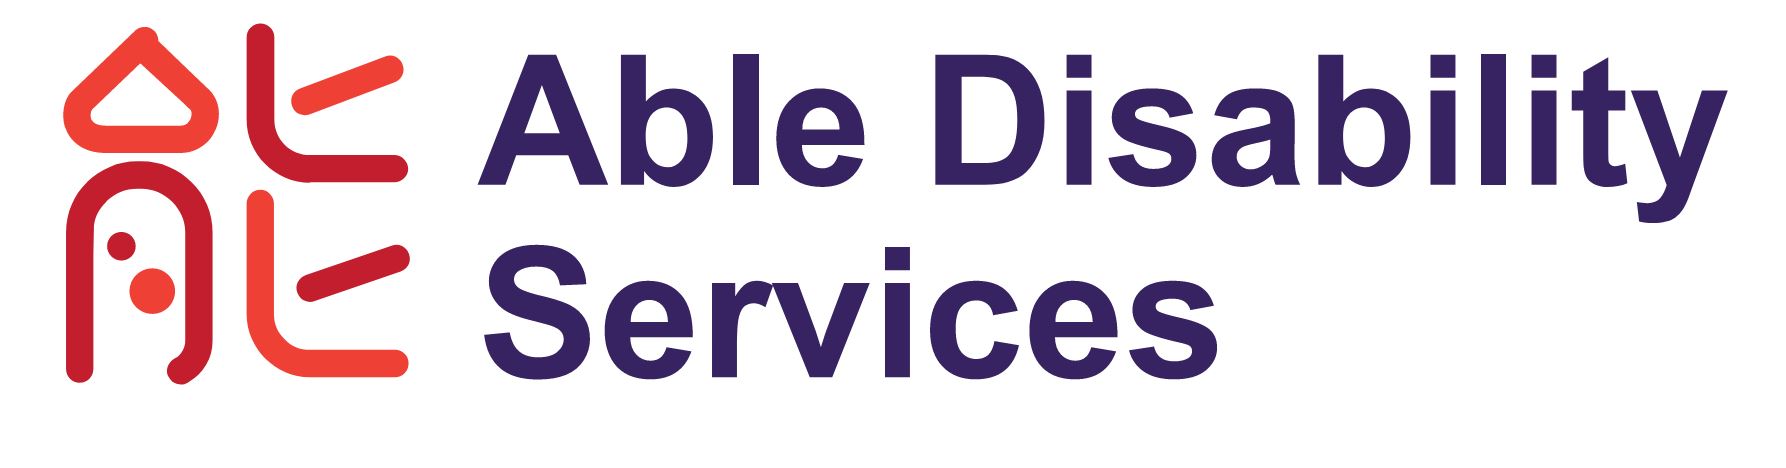 Able Disability Services logo